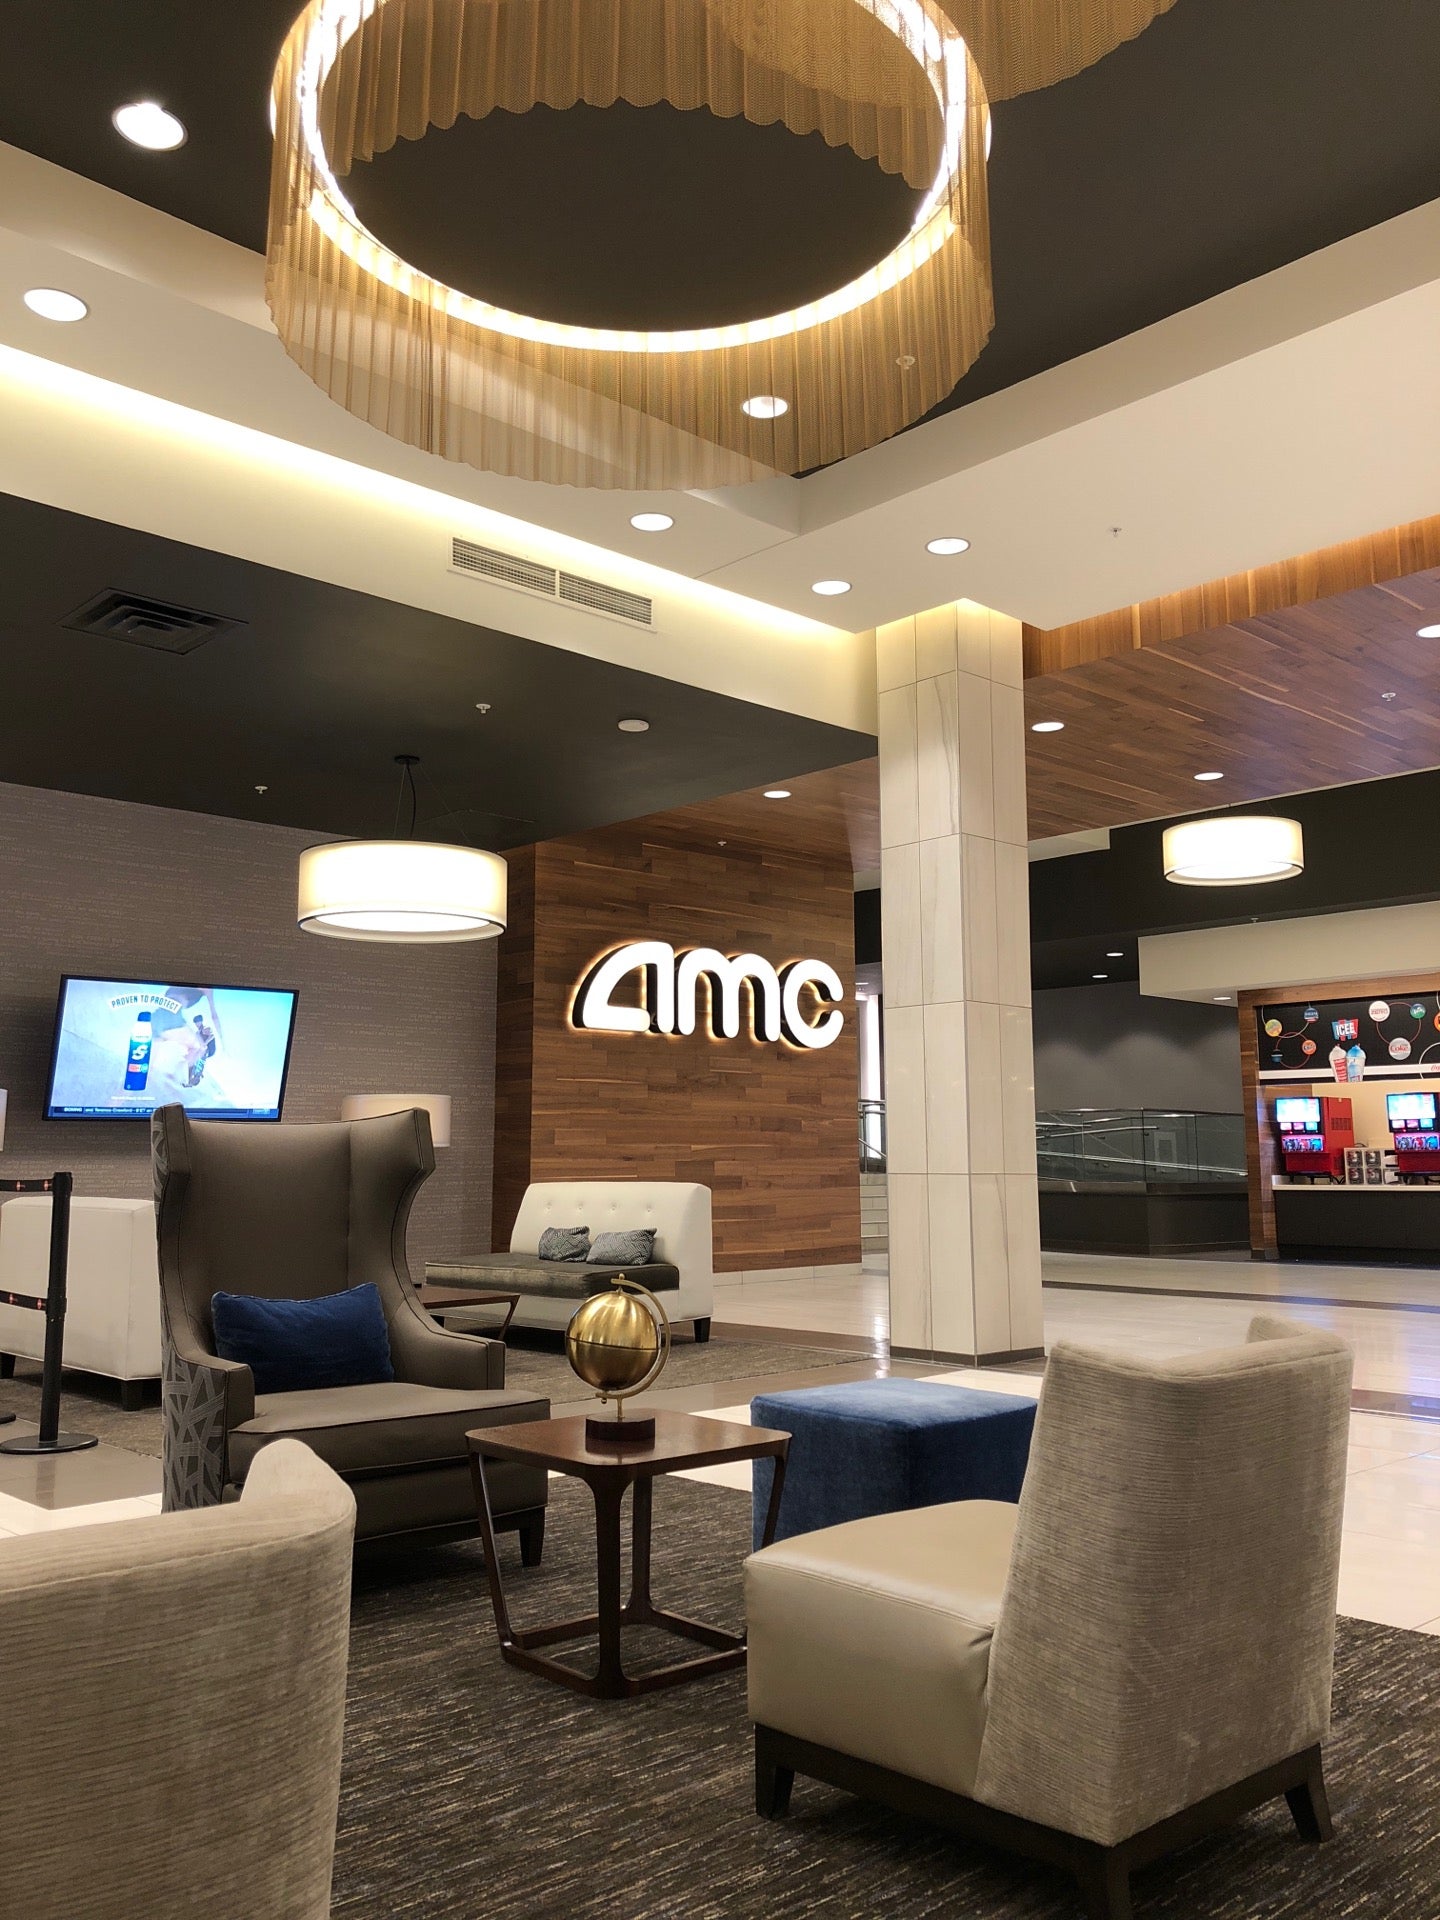 AMC dine-in theater opening in Hackensack